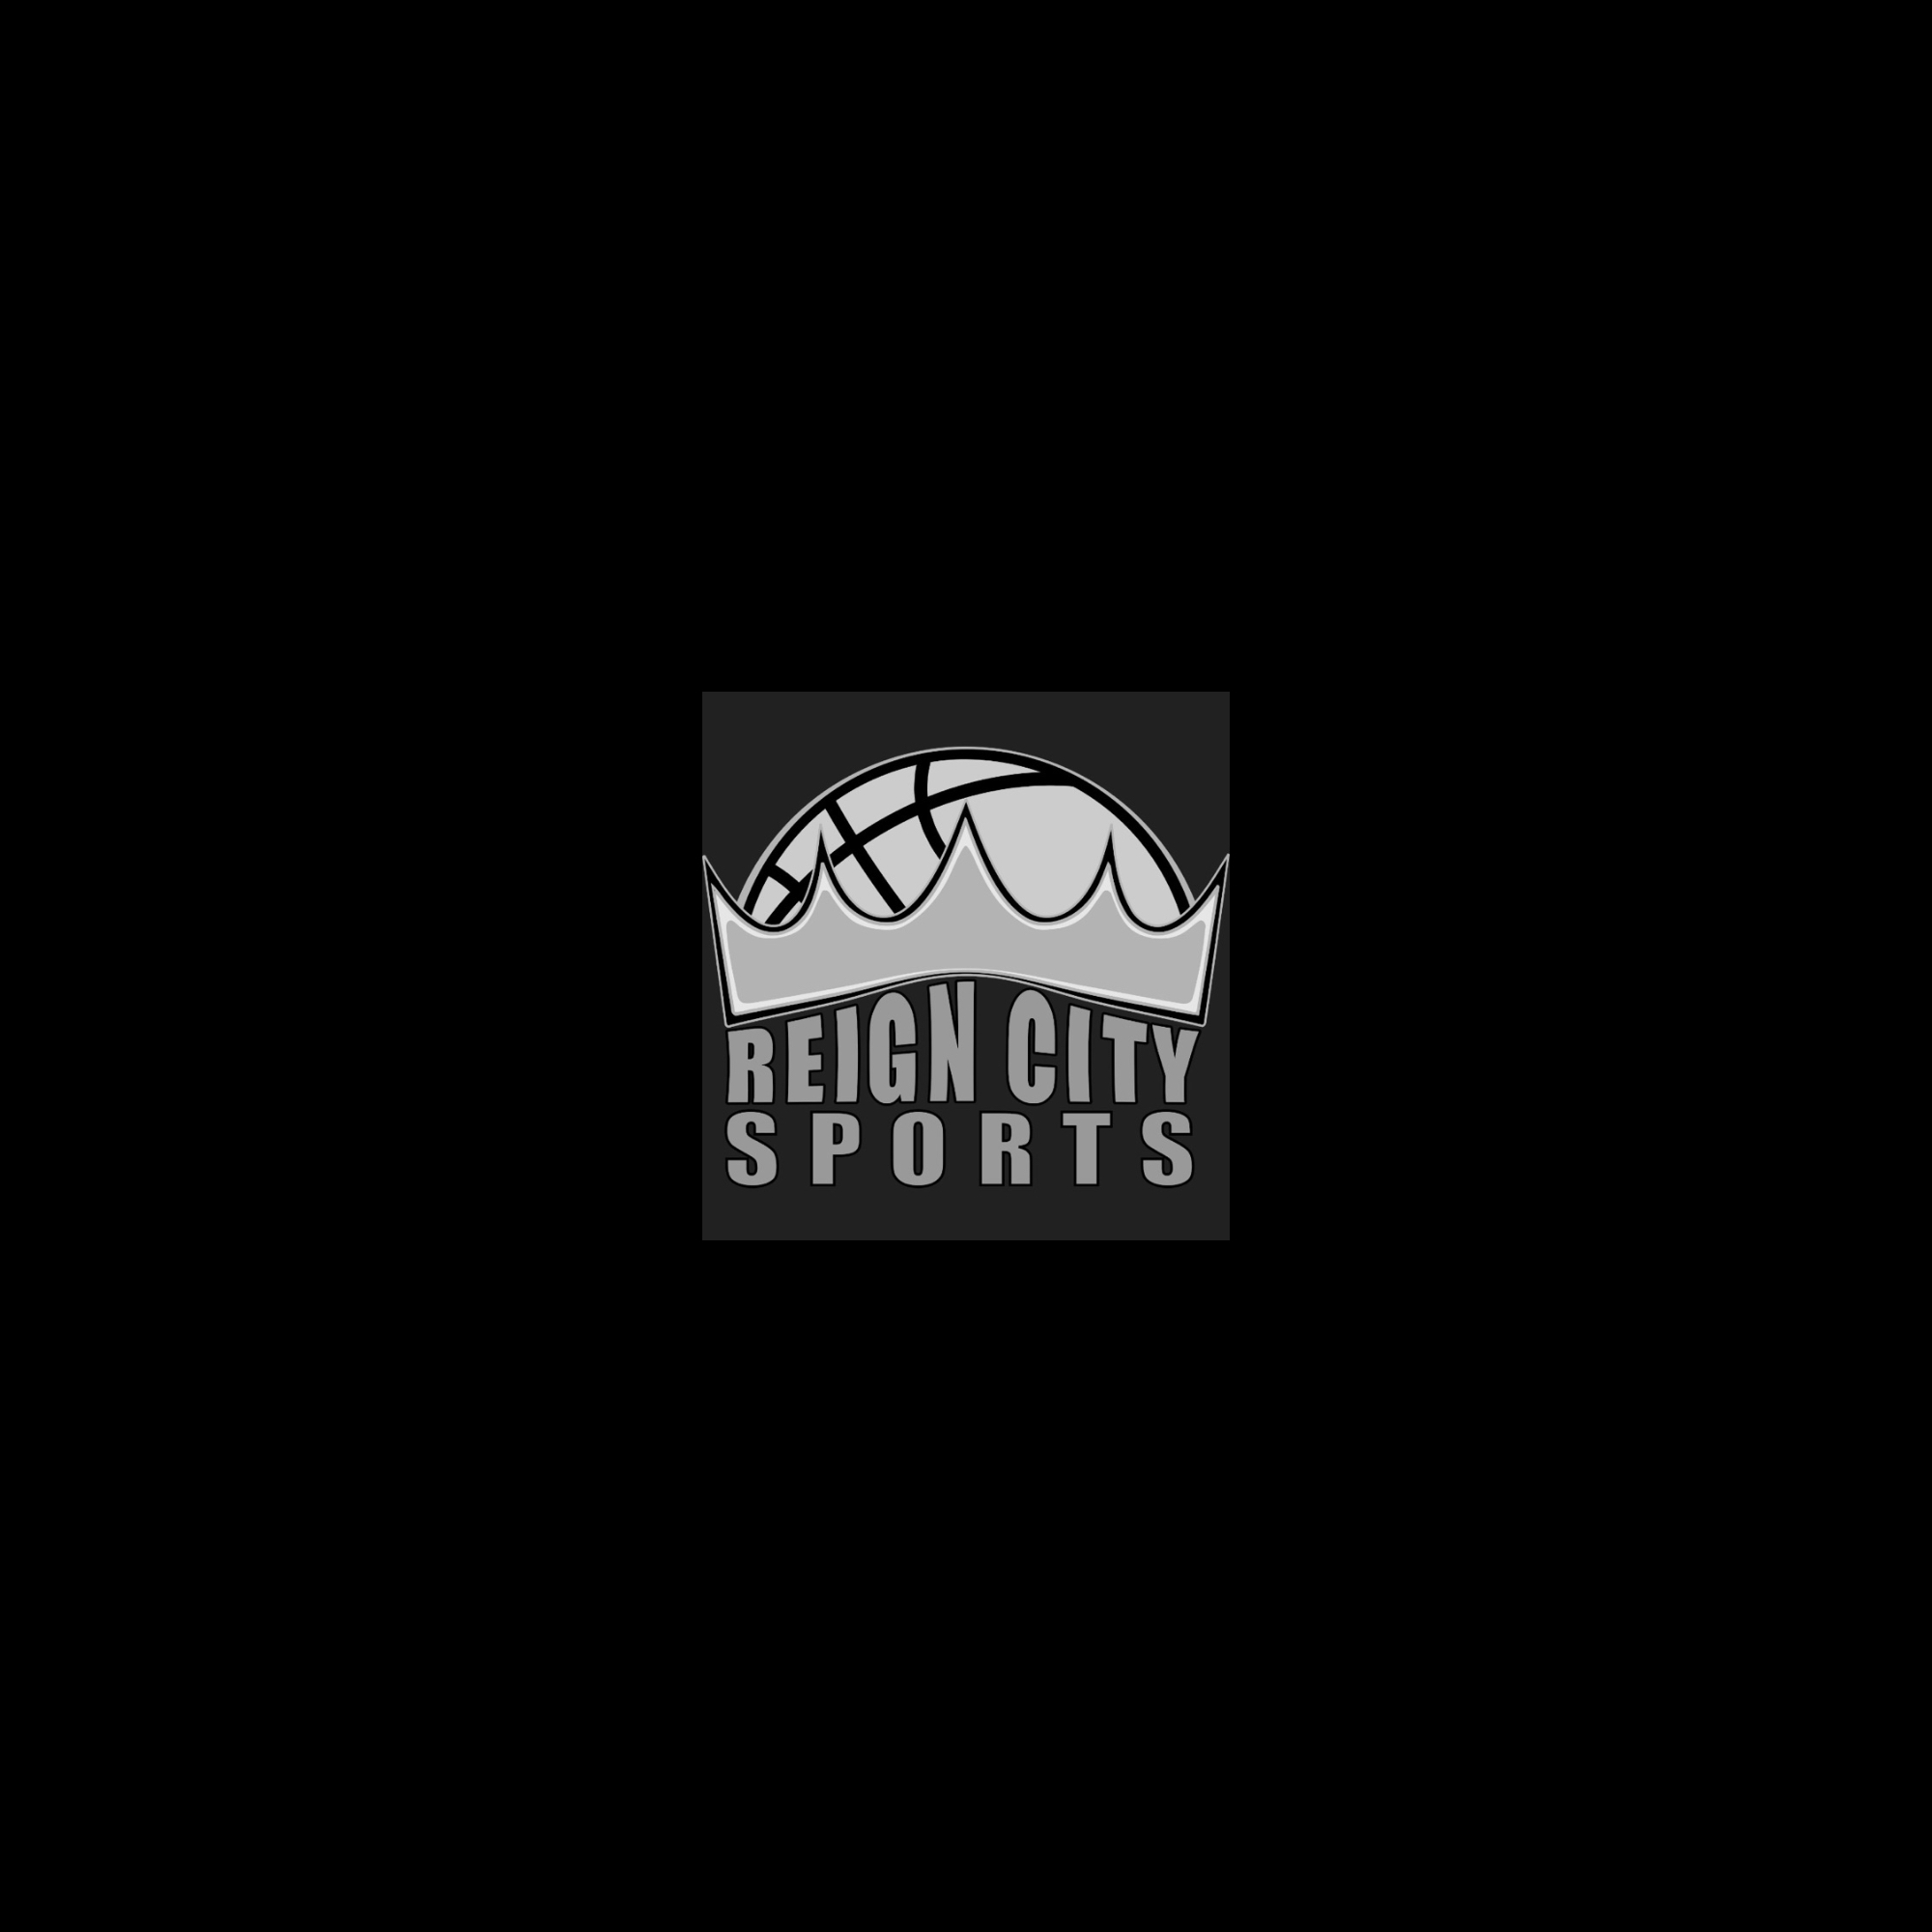 The official logo of Reign City Sports